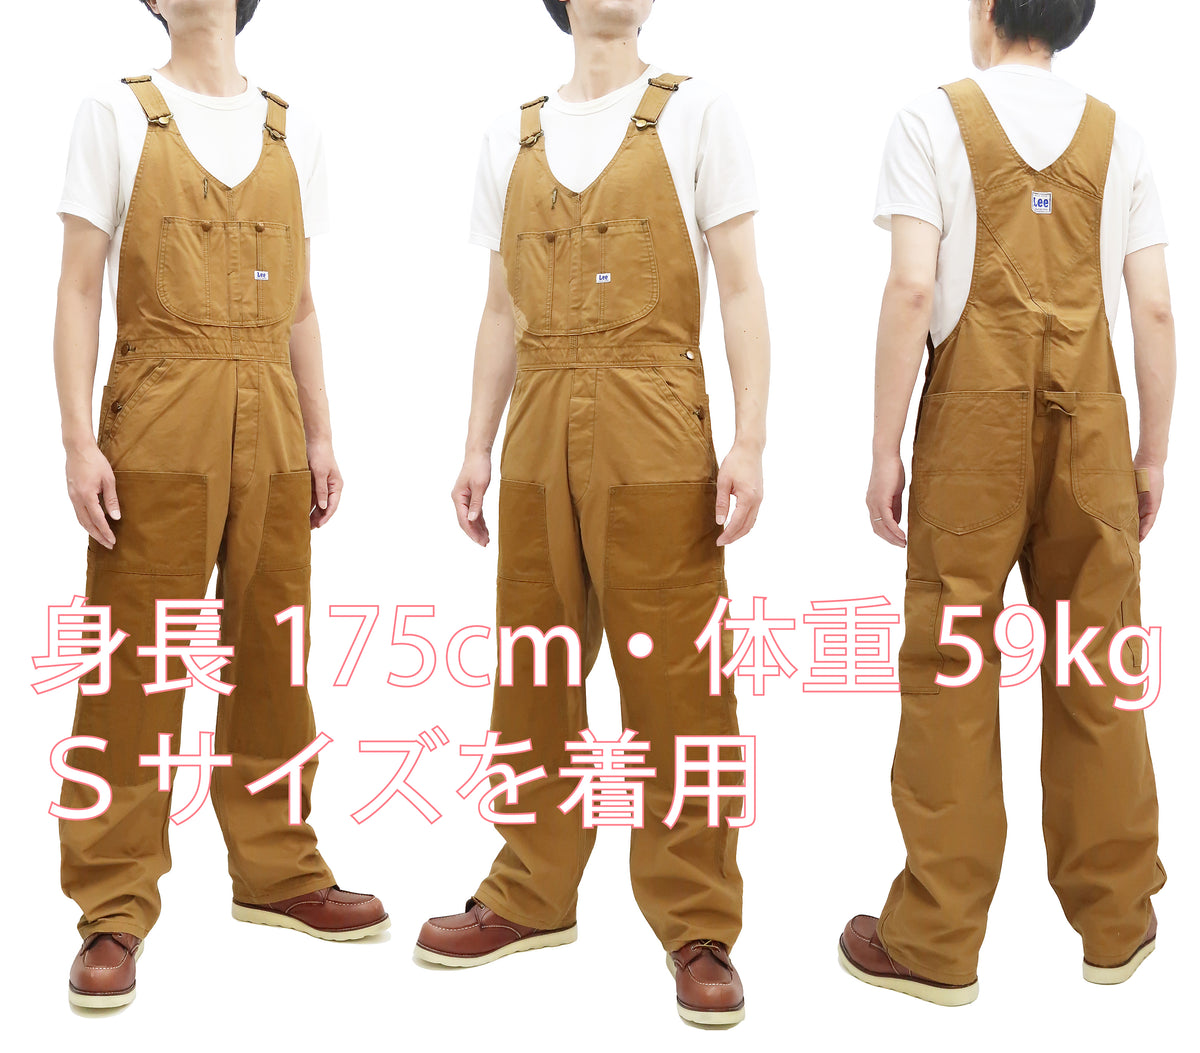 Lee Overalls Men's Casual Fashion Double Knee Duck Canvas Bib Overall  High-Back LM8605 LM8605-145 Brown